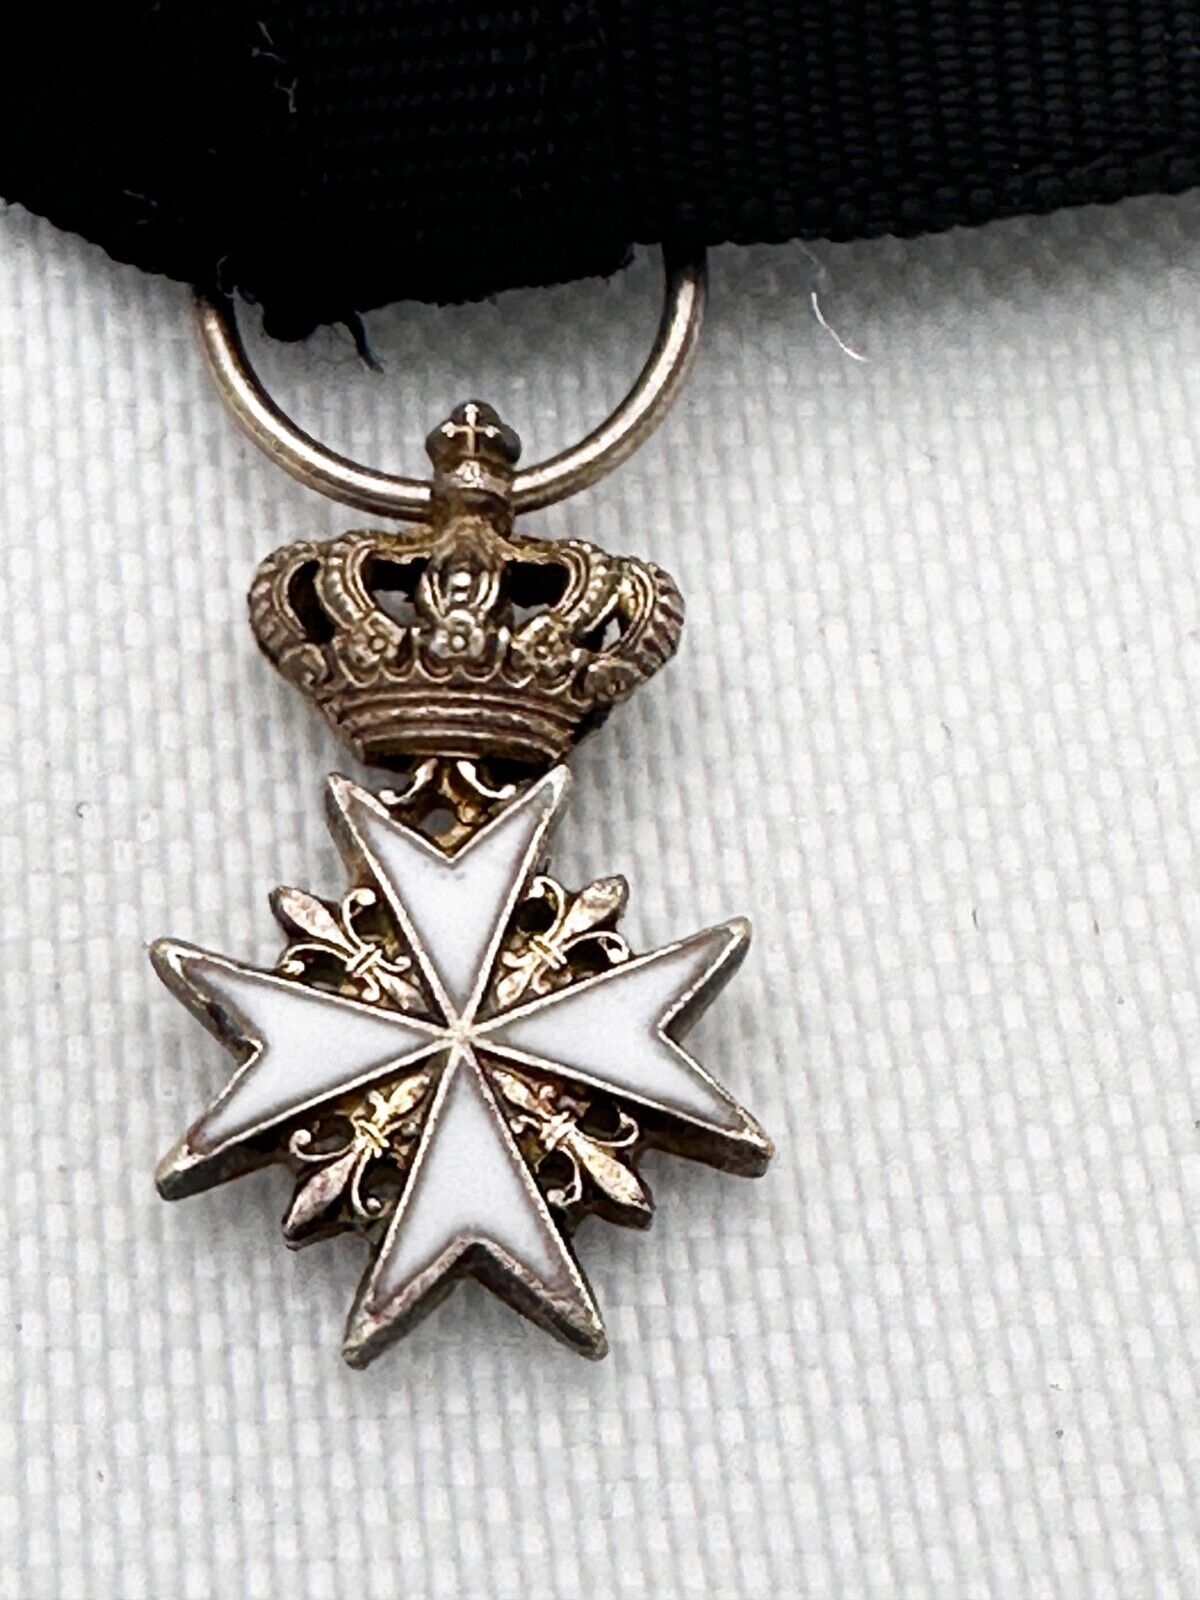 Miniature White Enamel and Gilt Military Order of Knights of Malta